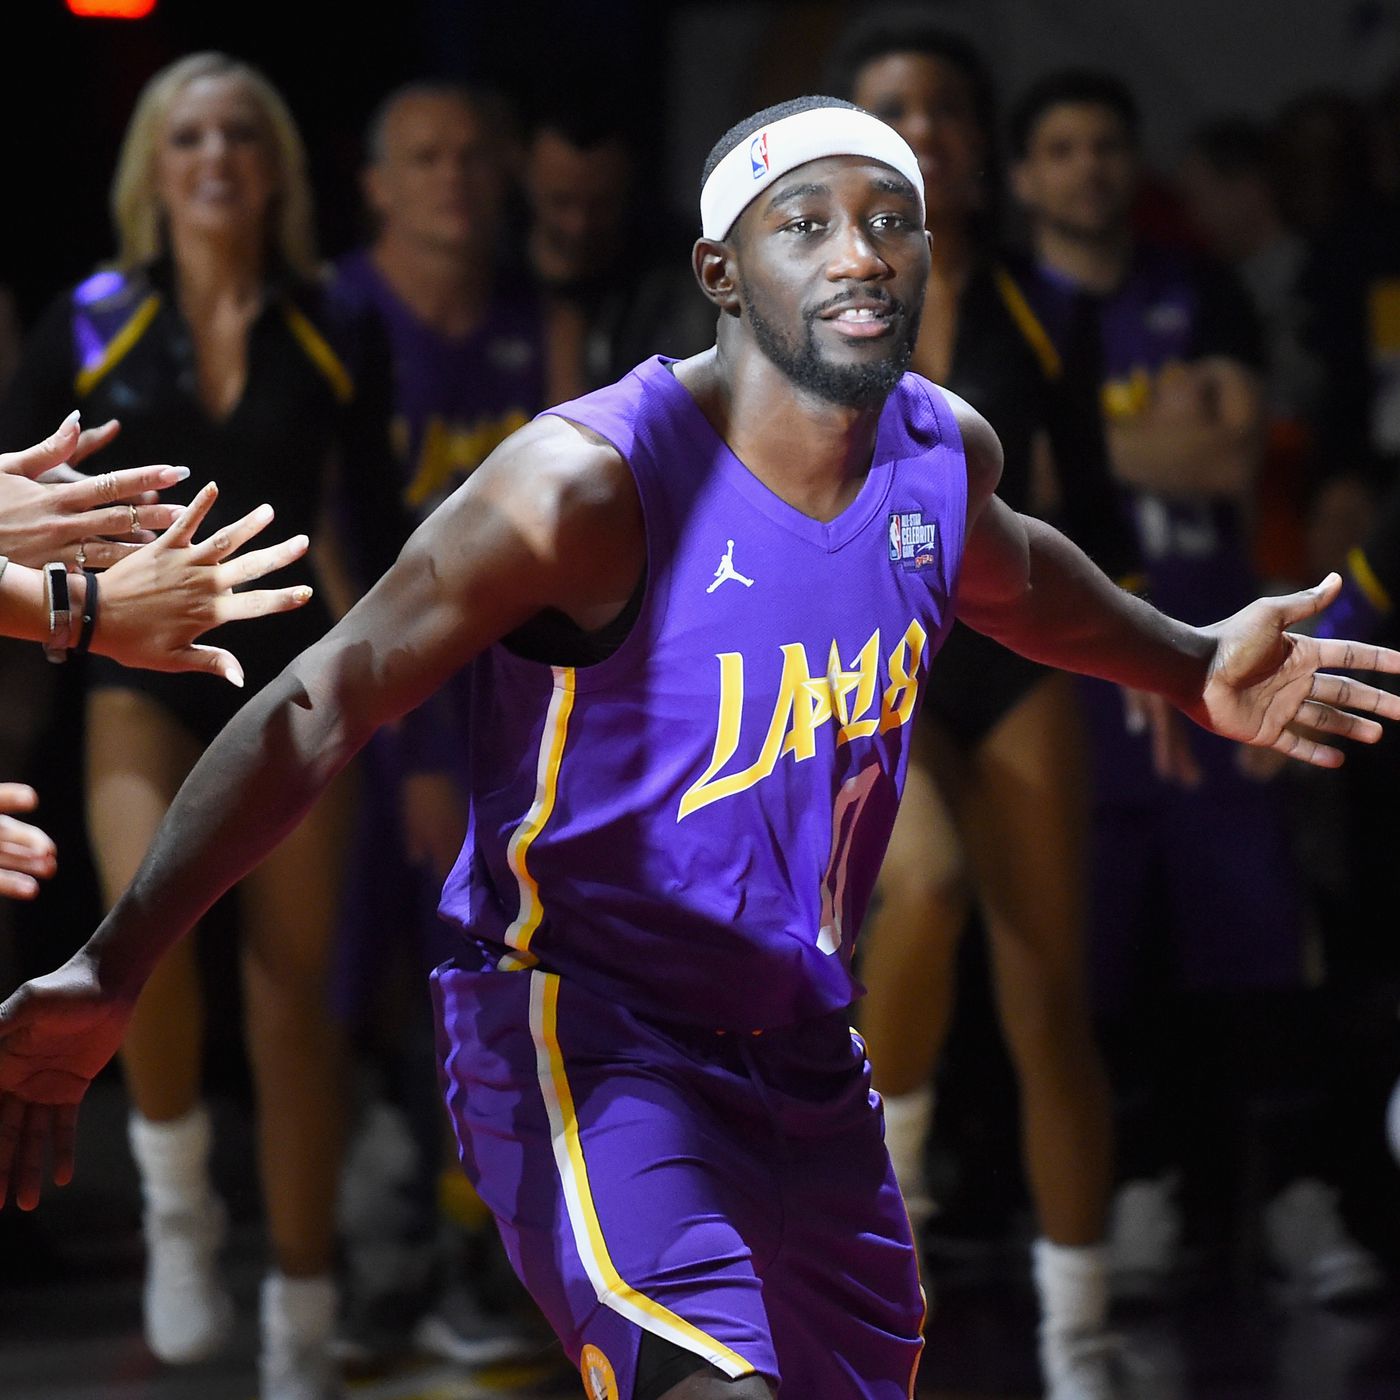 Video Boxer Terence Crawford Plays At The Nba All Star